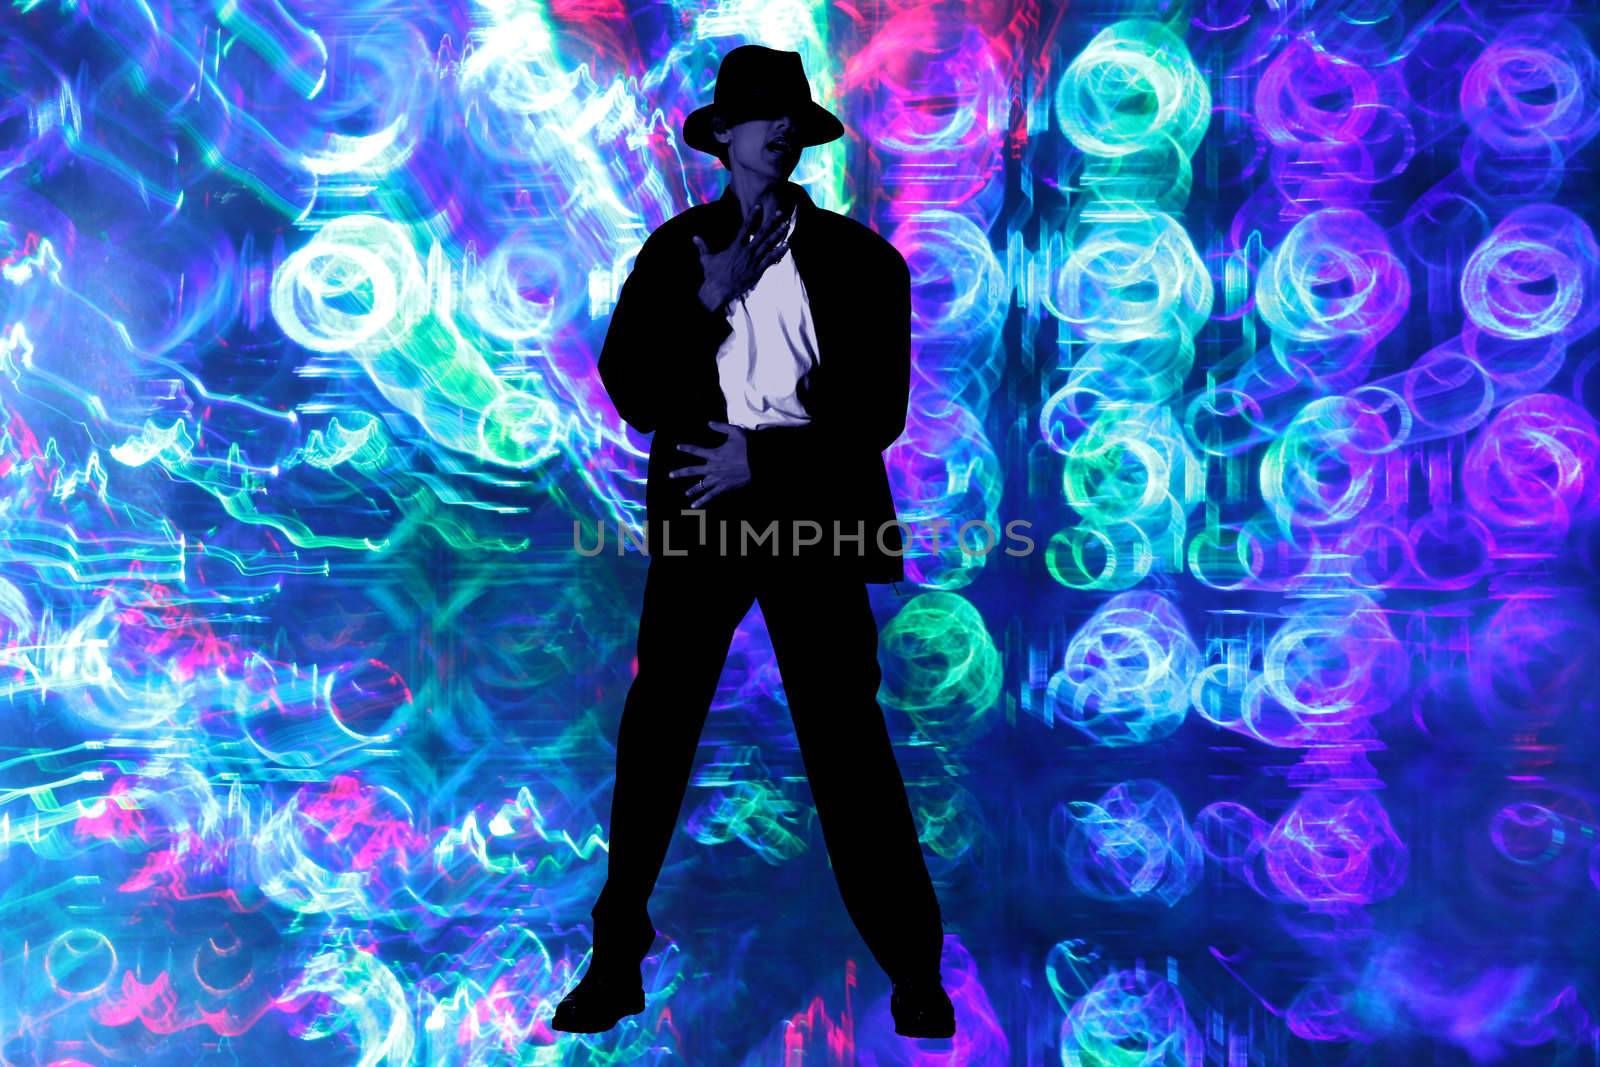 Michael Jackson by thefinalmiracle